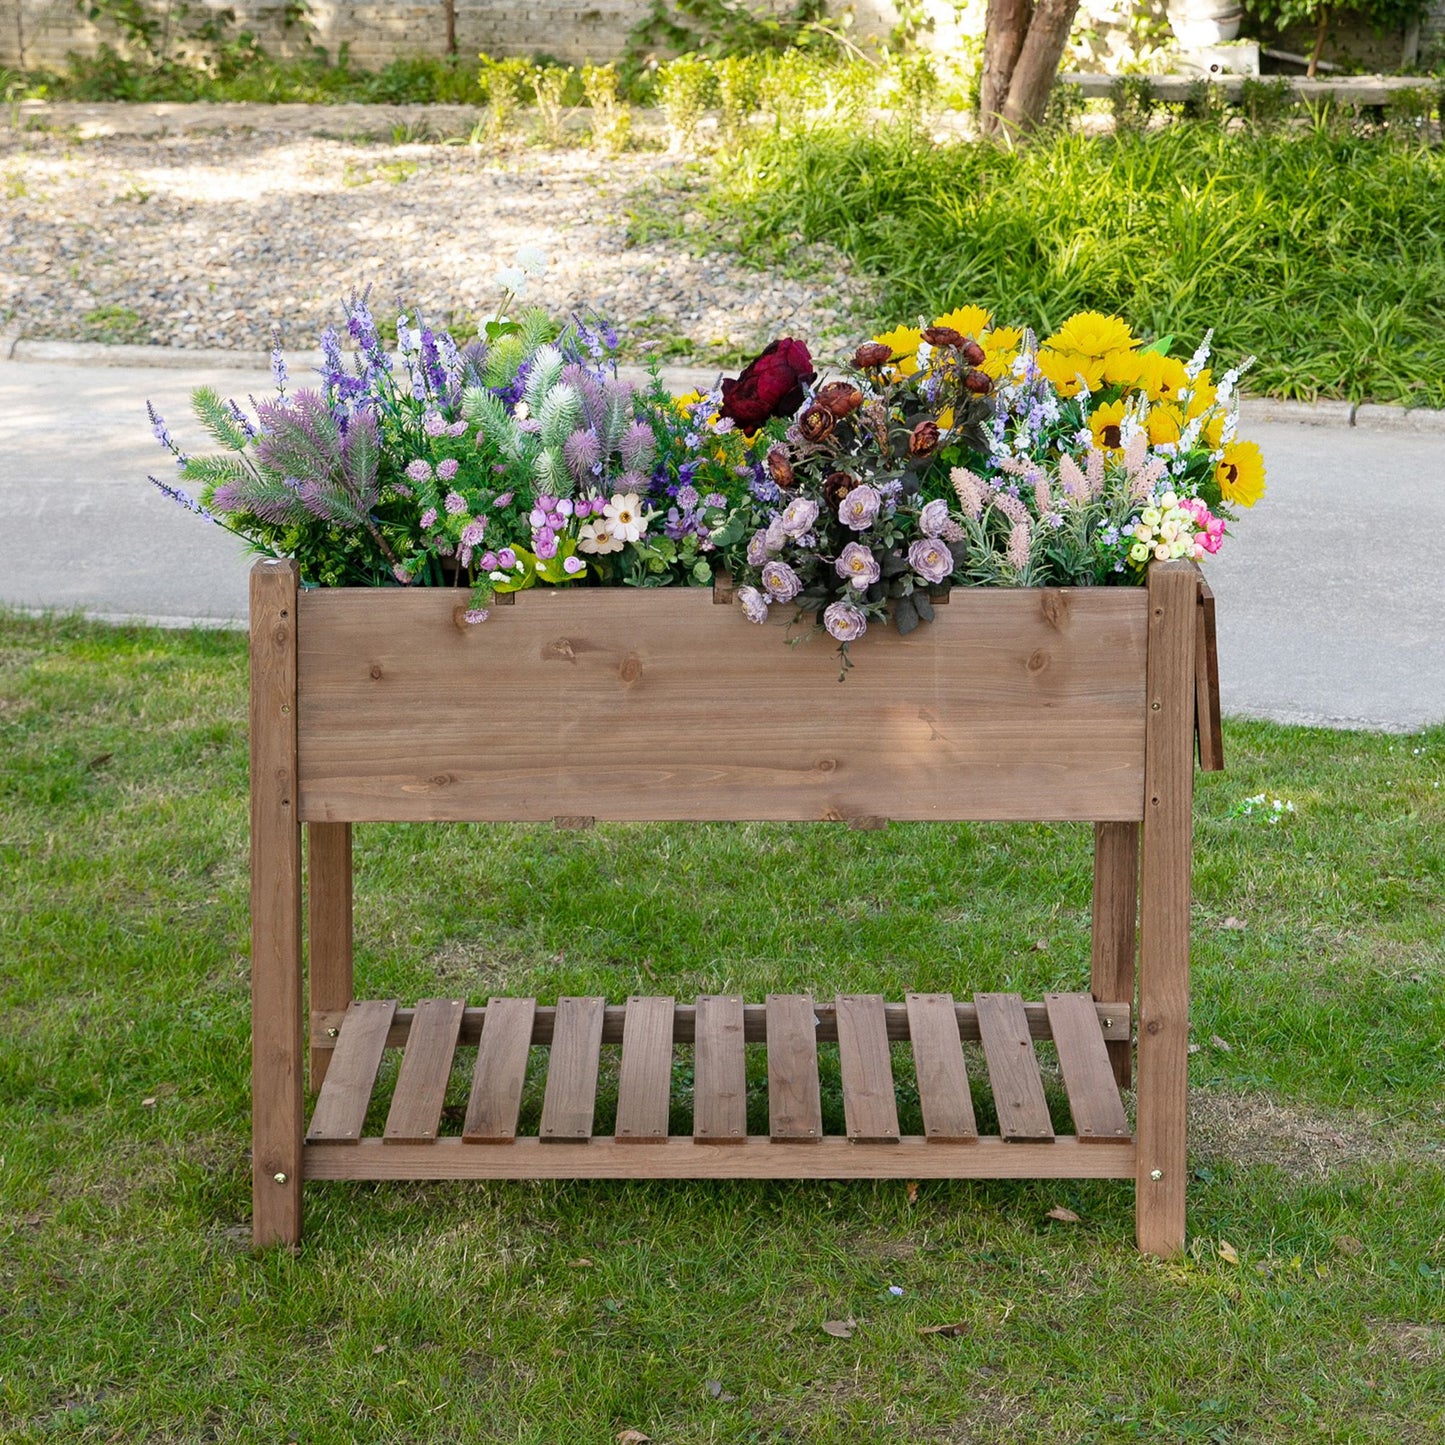 Outsunny Wooden Raised Garden Plant Stand Tall Flower Bed with Shelf 123 x 54 x 74cm